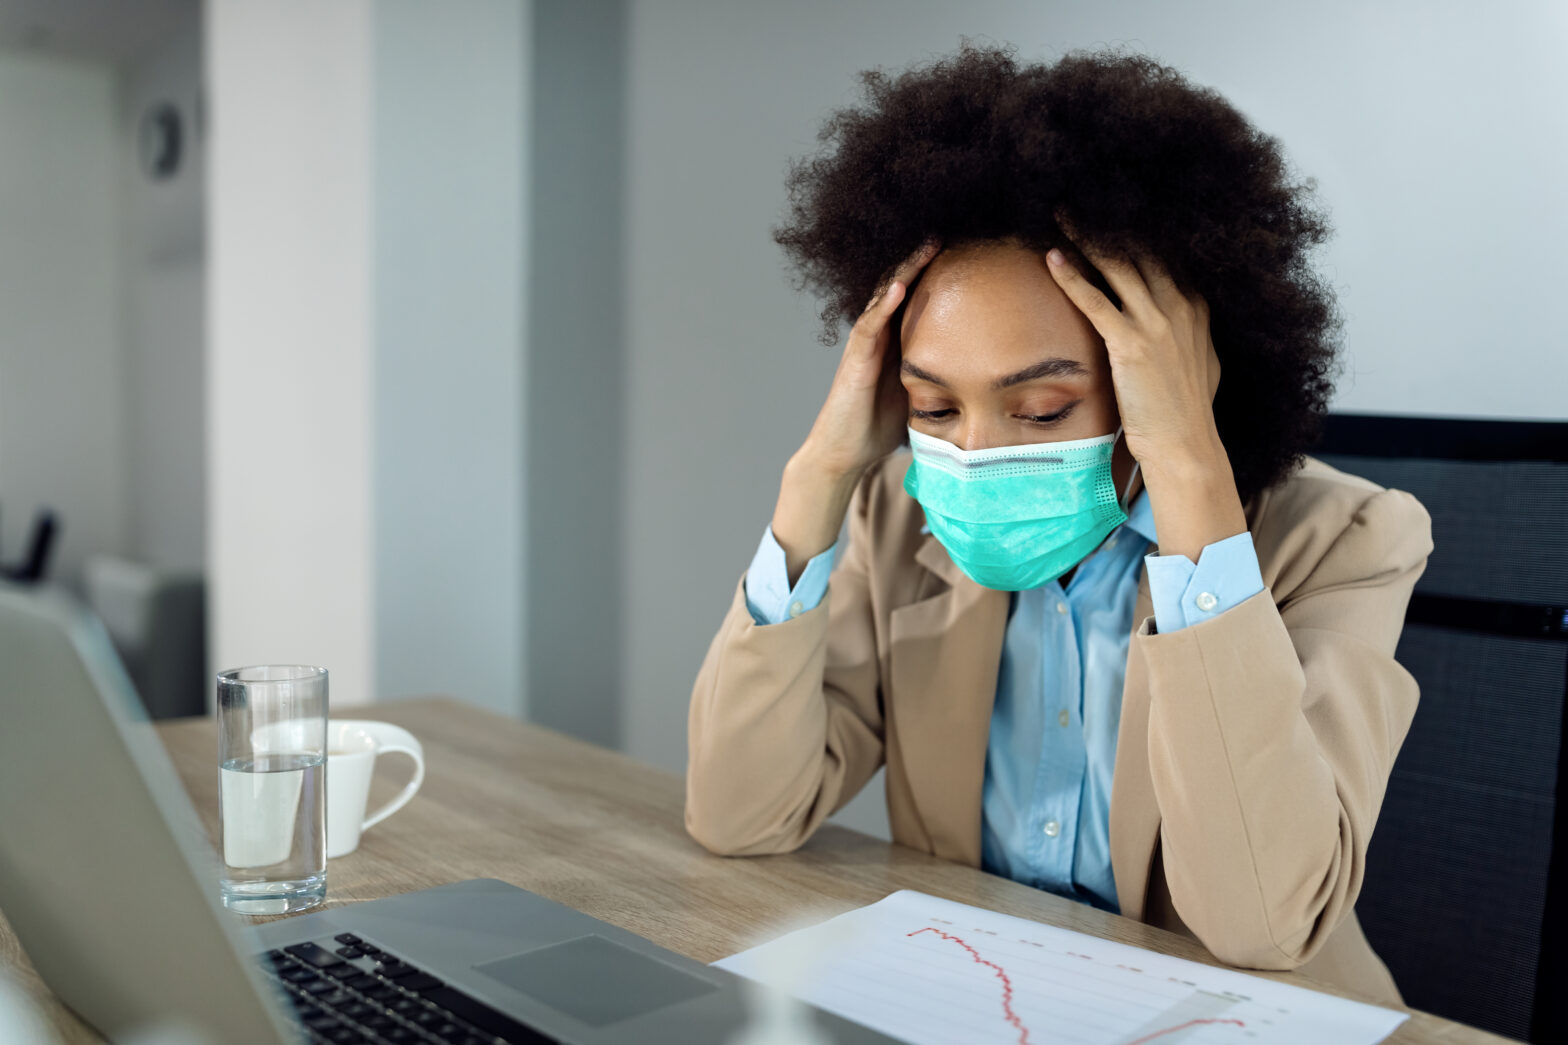 Black businesswoman feeling stressed out while working in the office during coronavirus pandemic.